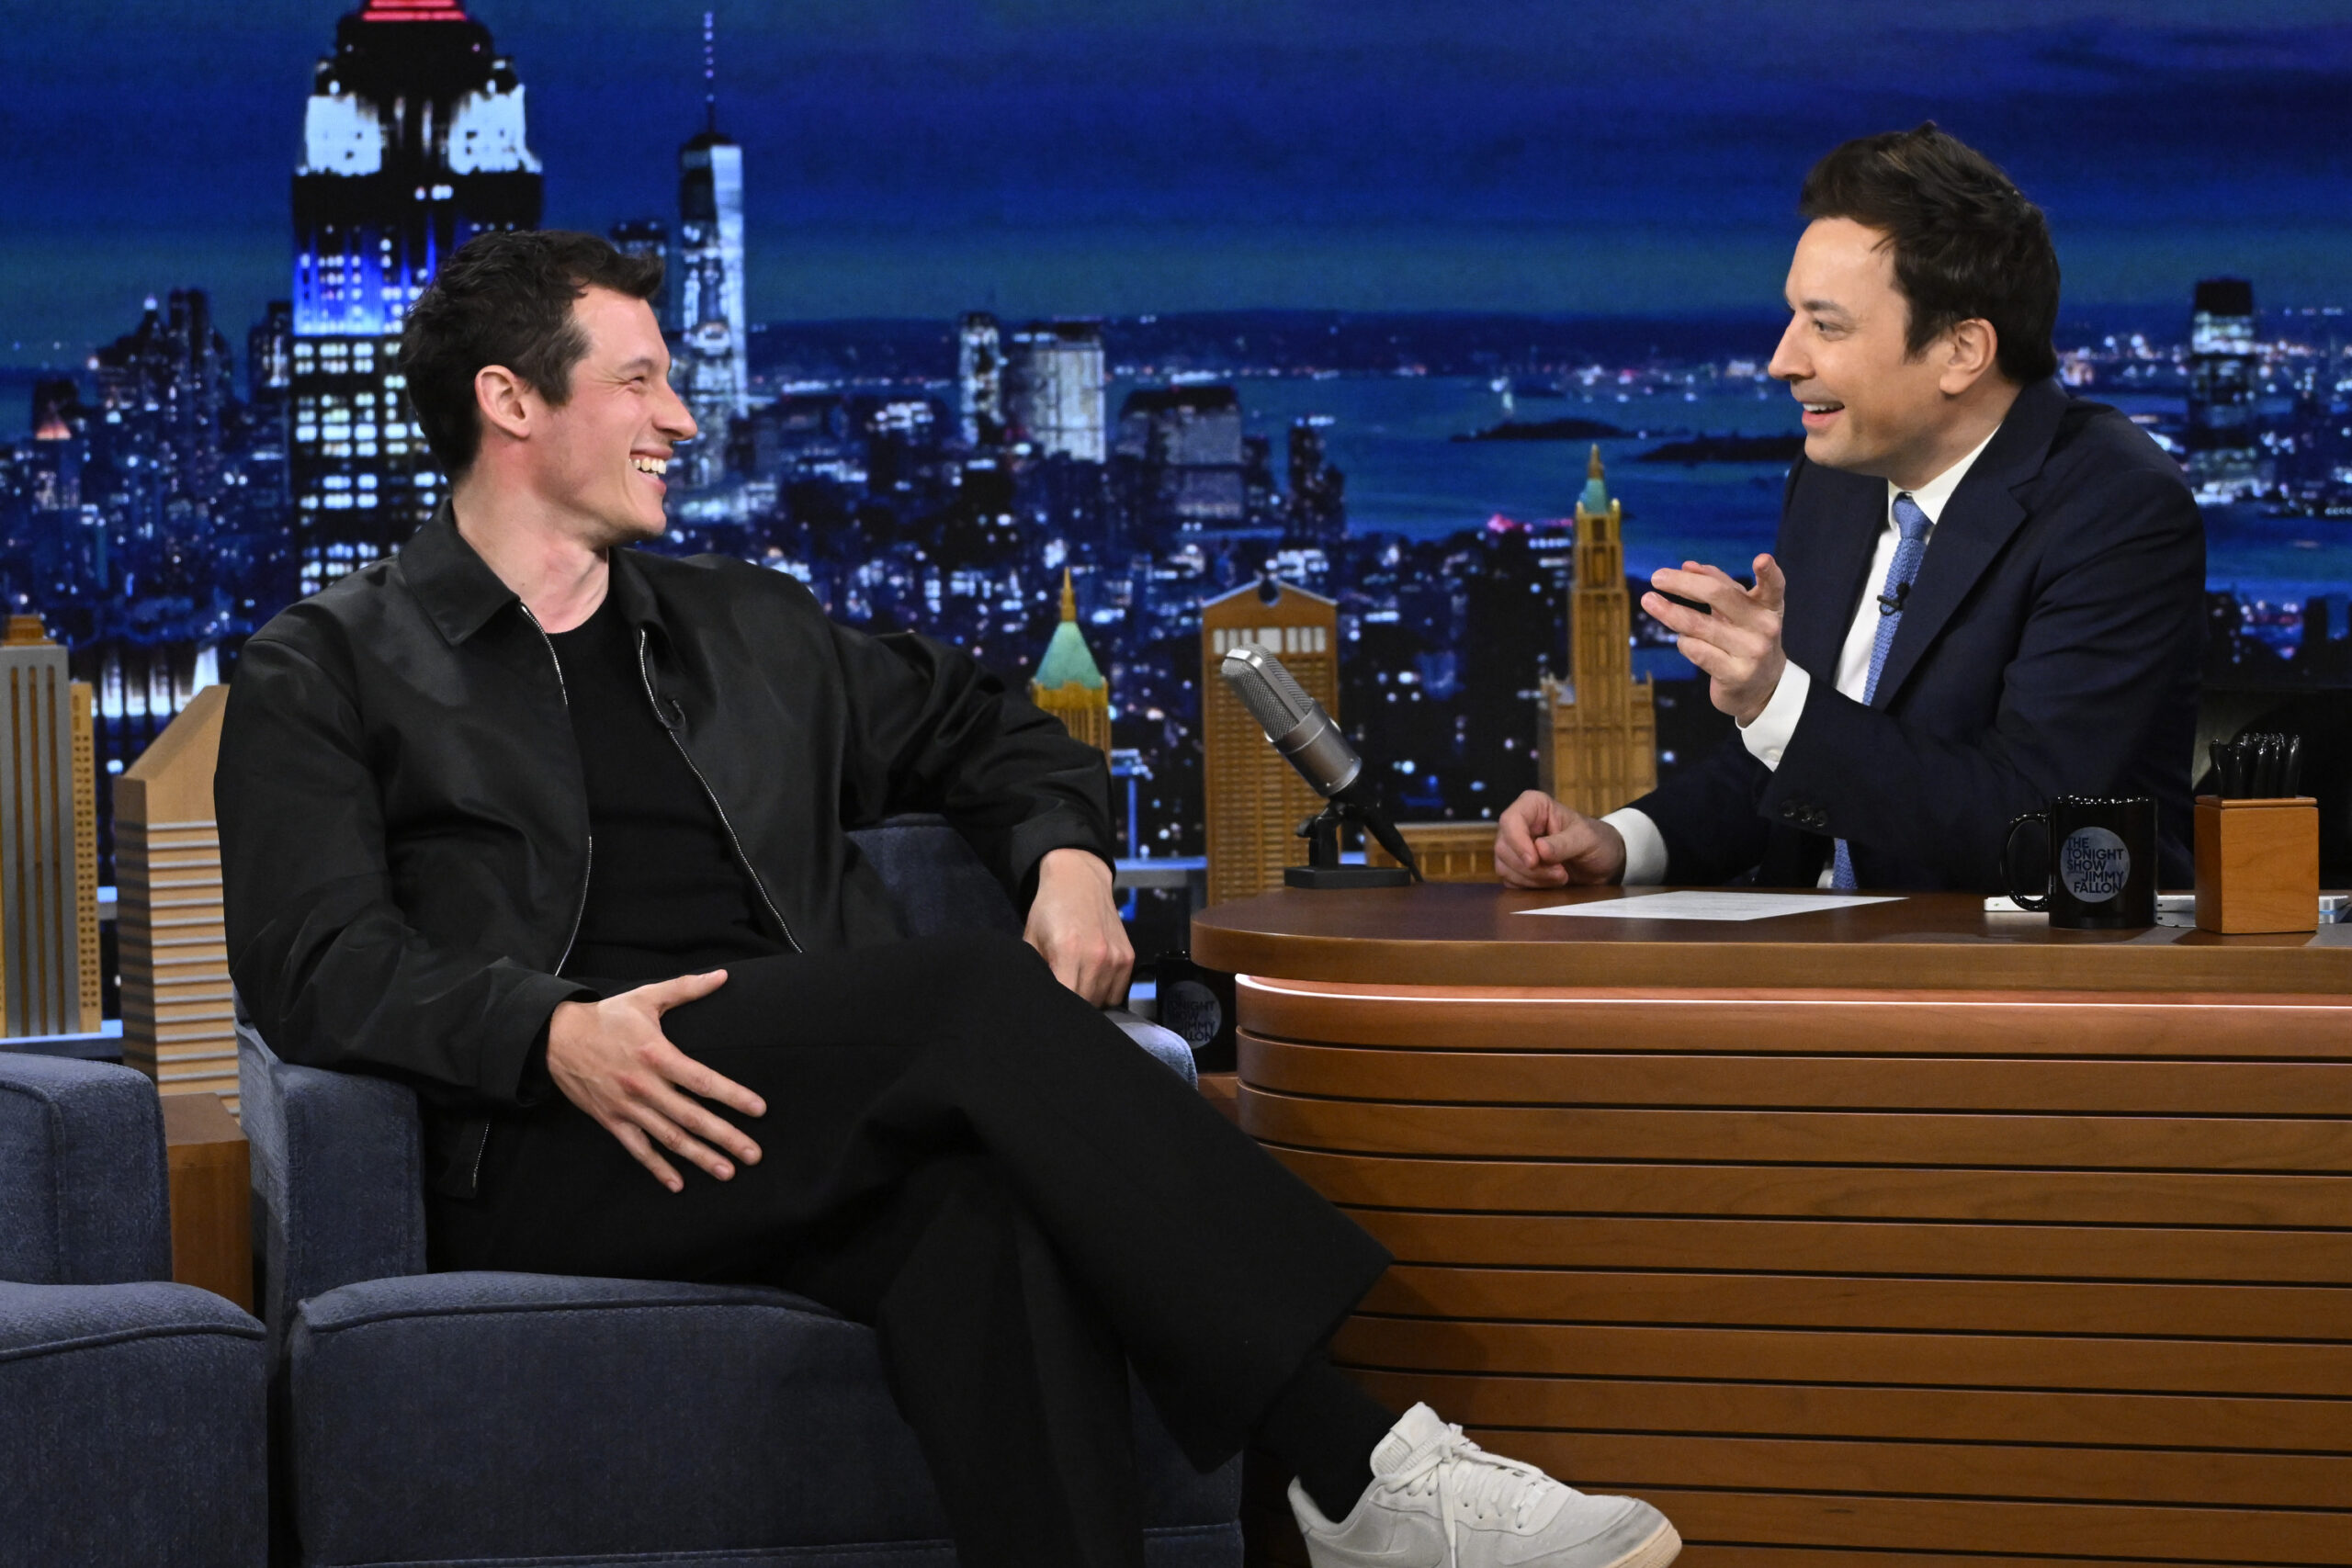 Actor Callum Turner and Jimmy Fallon engaged in a lively conversation on a talk show set, with one man seated across from the host, both laughing and gesturing.